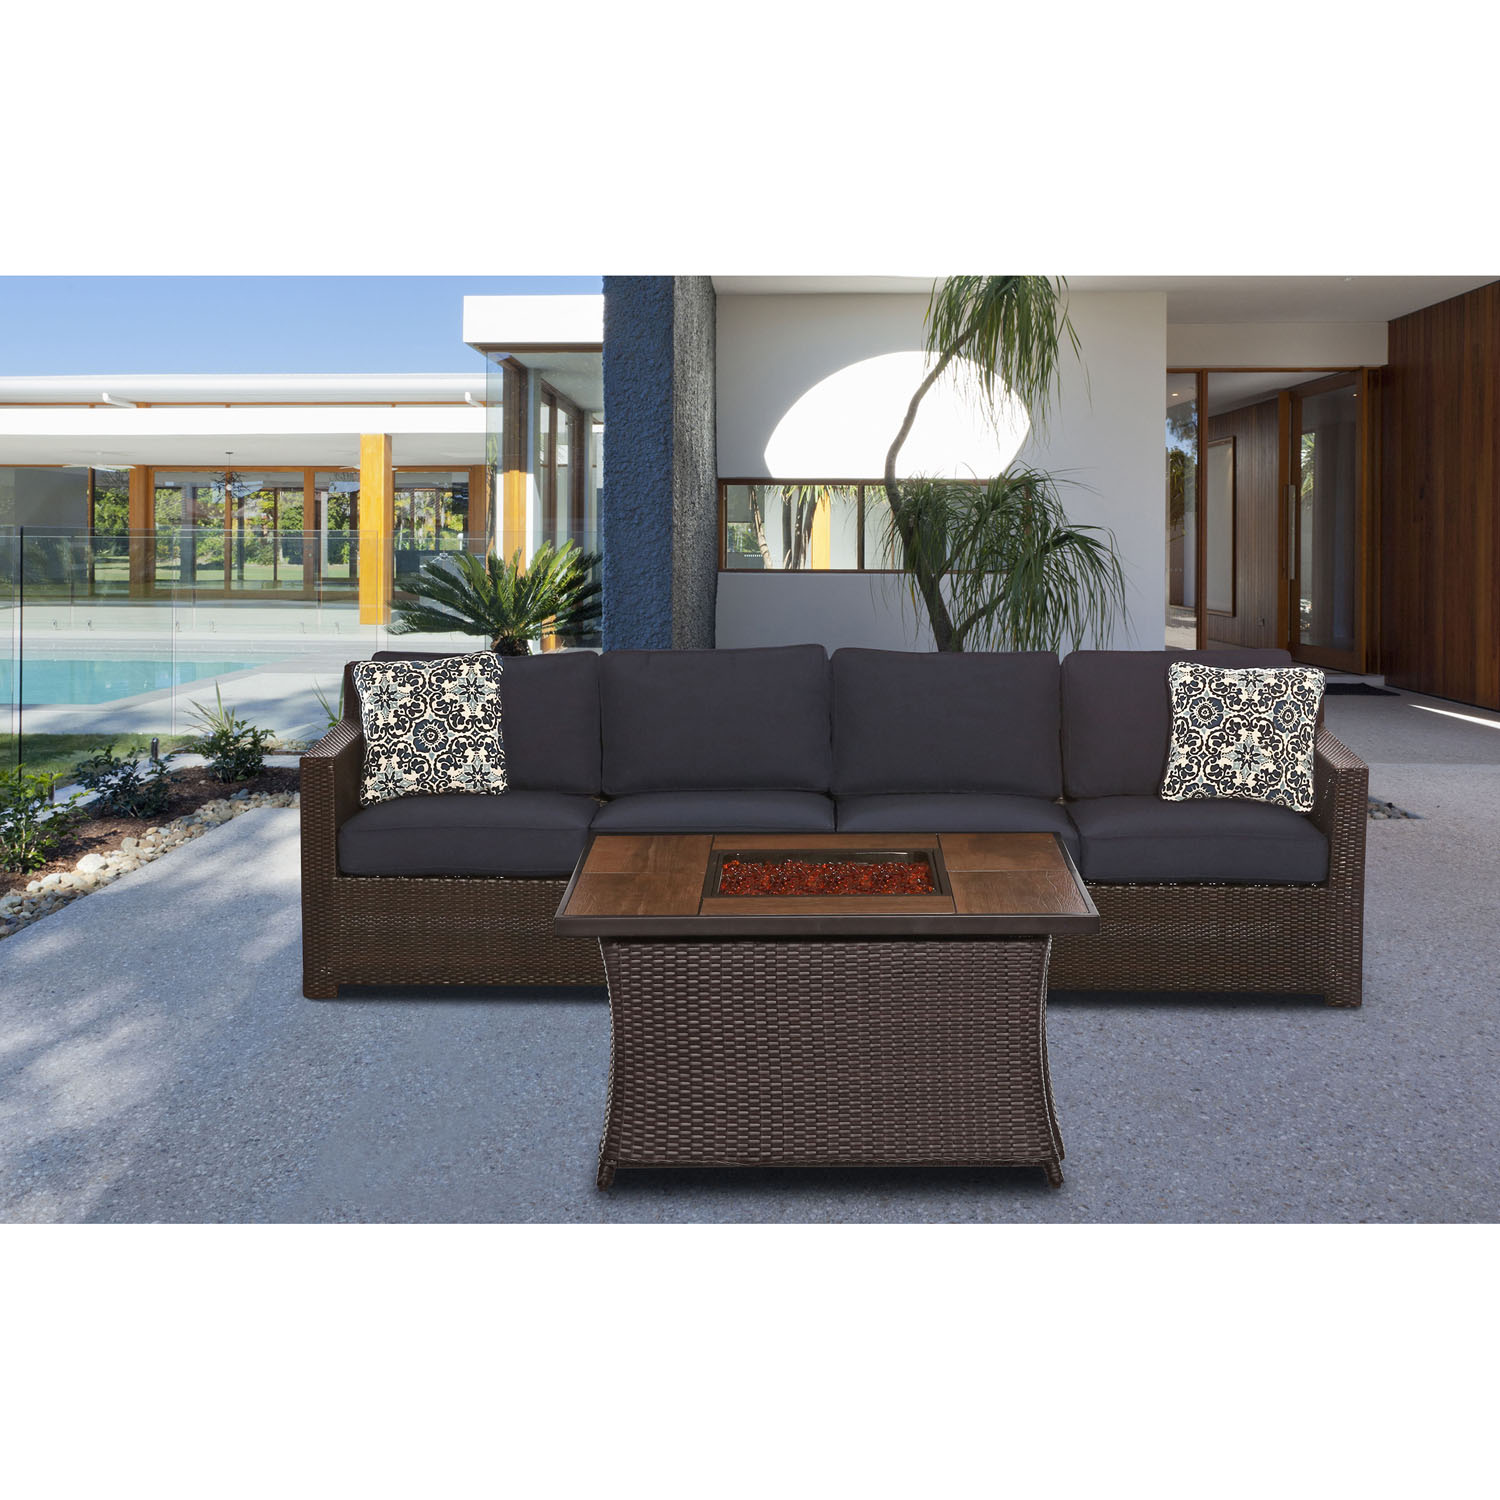 Hanover Metropolitan 3-Piece Woven Fire Pit Lounge Set with Glazed Faux-Wood Tile Top - image 1 of 7